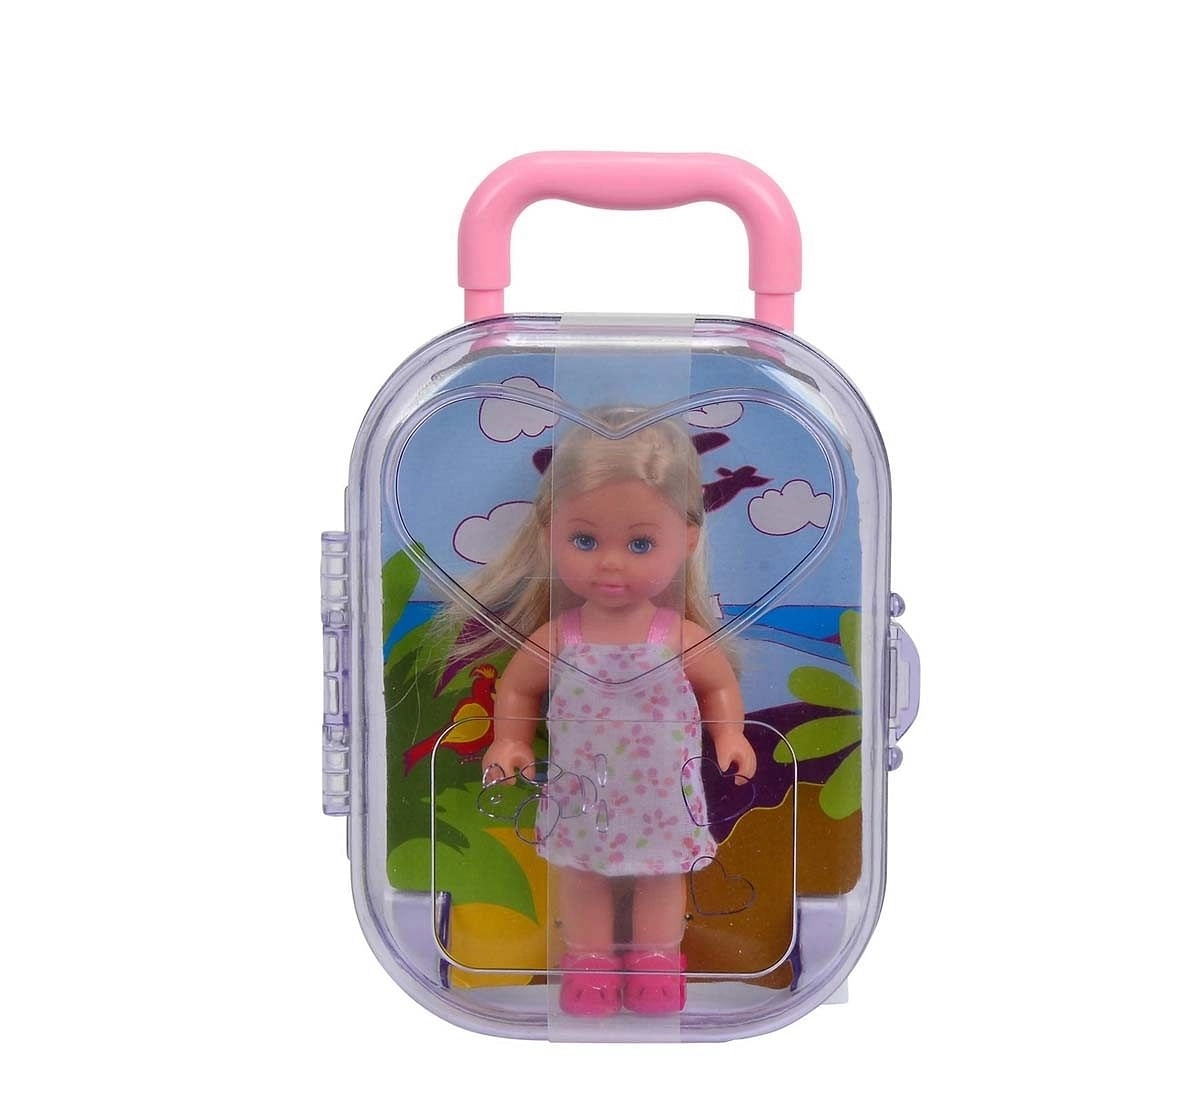 Simba - Steffi Love Evi Trolley 4 Assorted Dolls & Accessories for Kids Age 3Y+